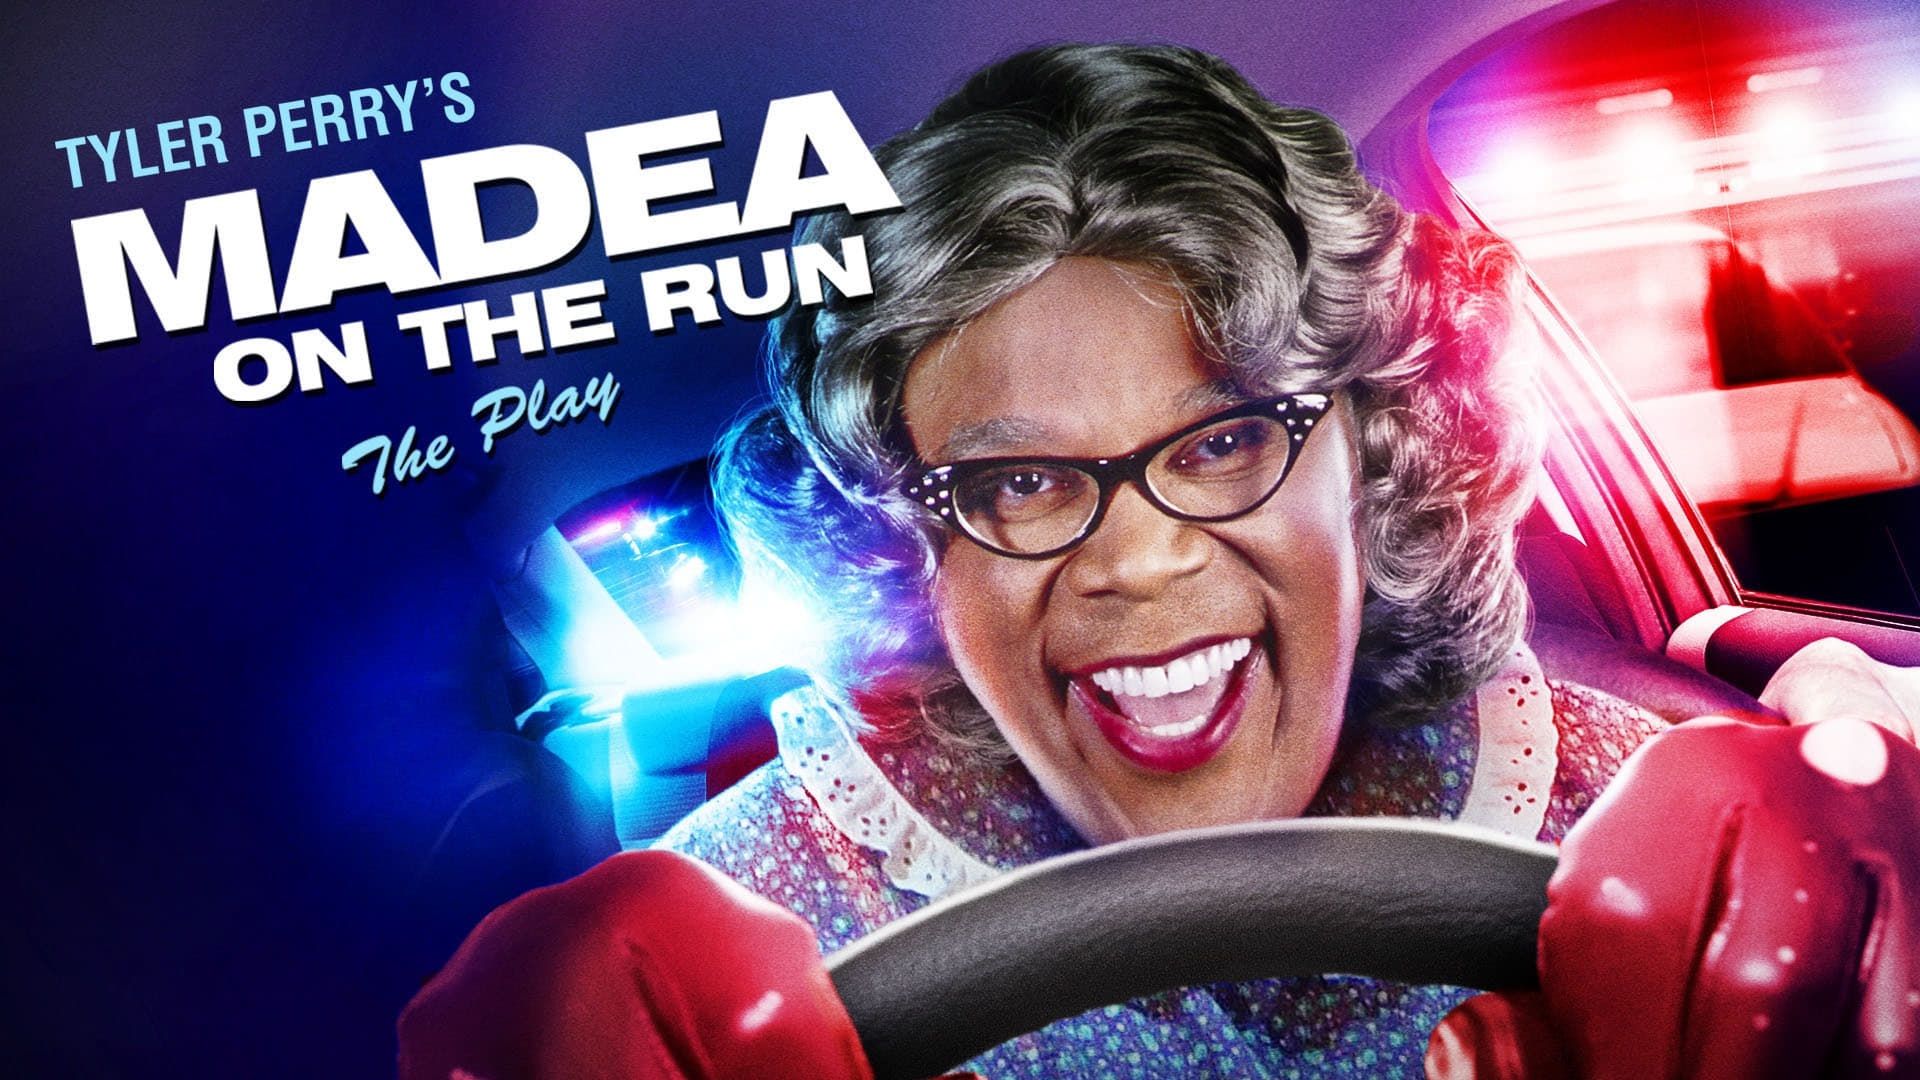 Tyler Perry's: Madea on the Run background